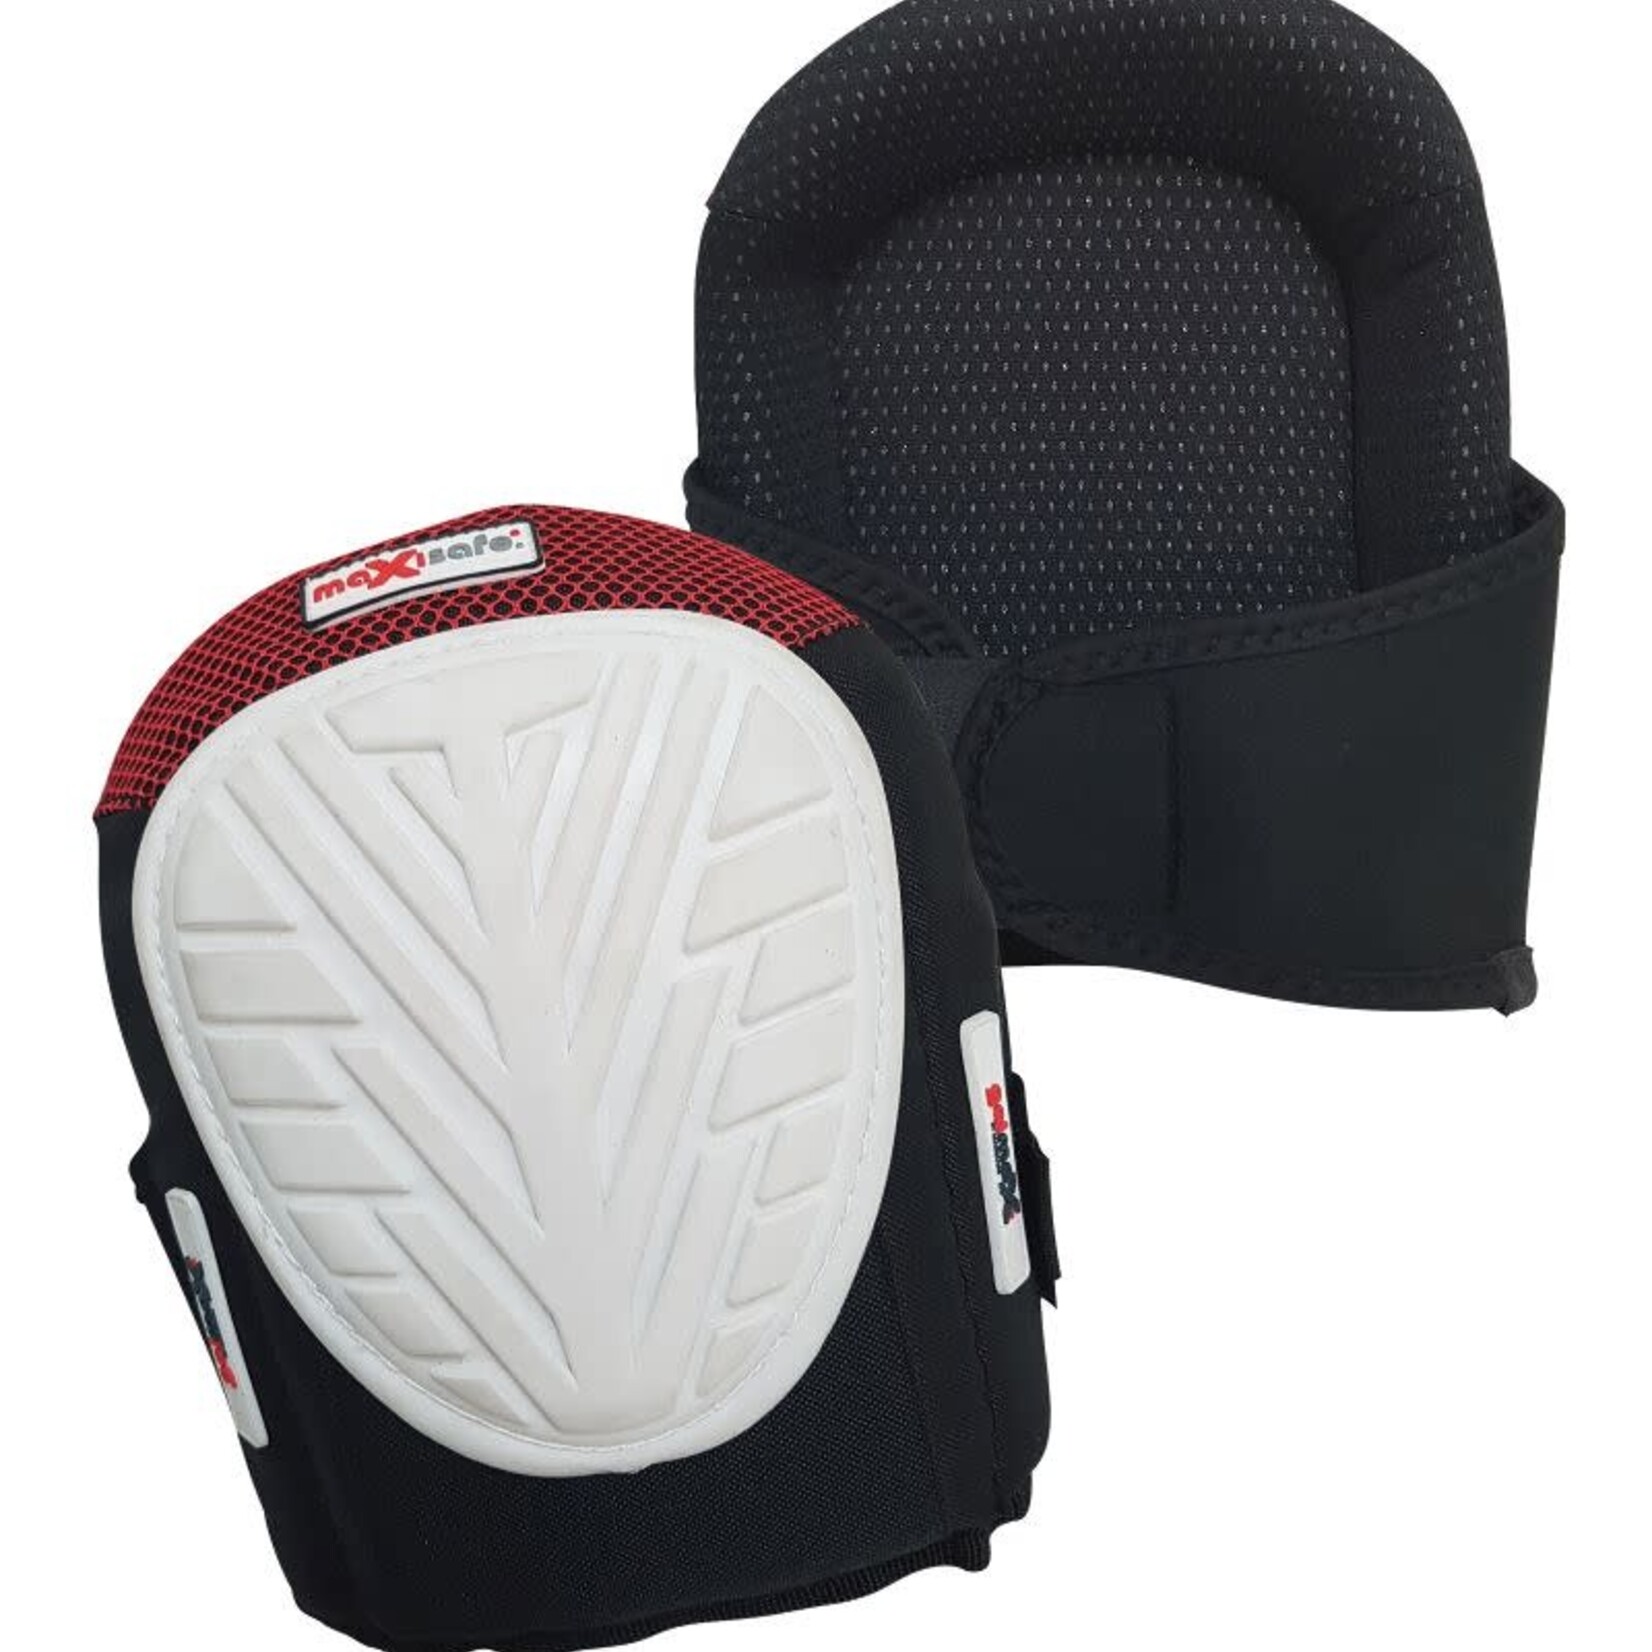 MaxiSafe Professional Gel Knee Pad